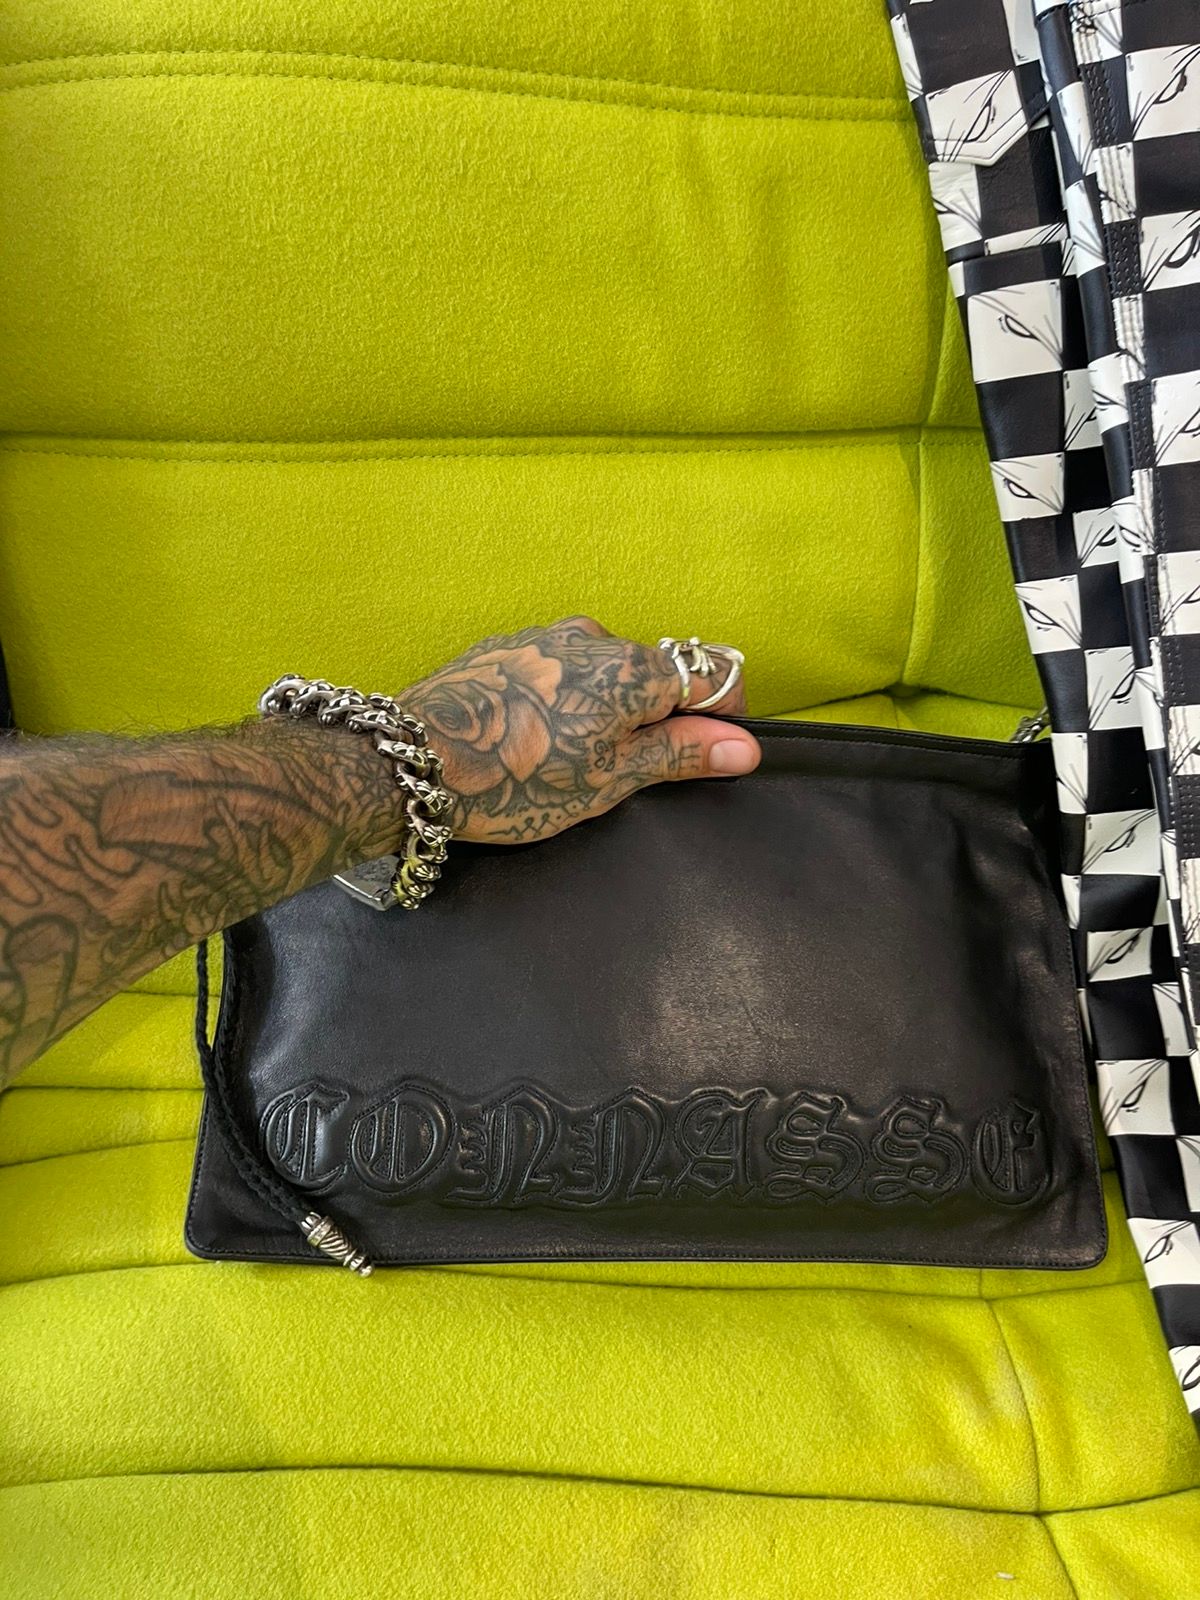 Chrome Hearts Custom French “CUNT” Spell Out Bag Leather